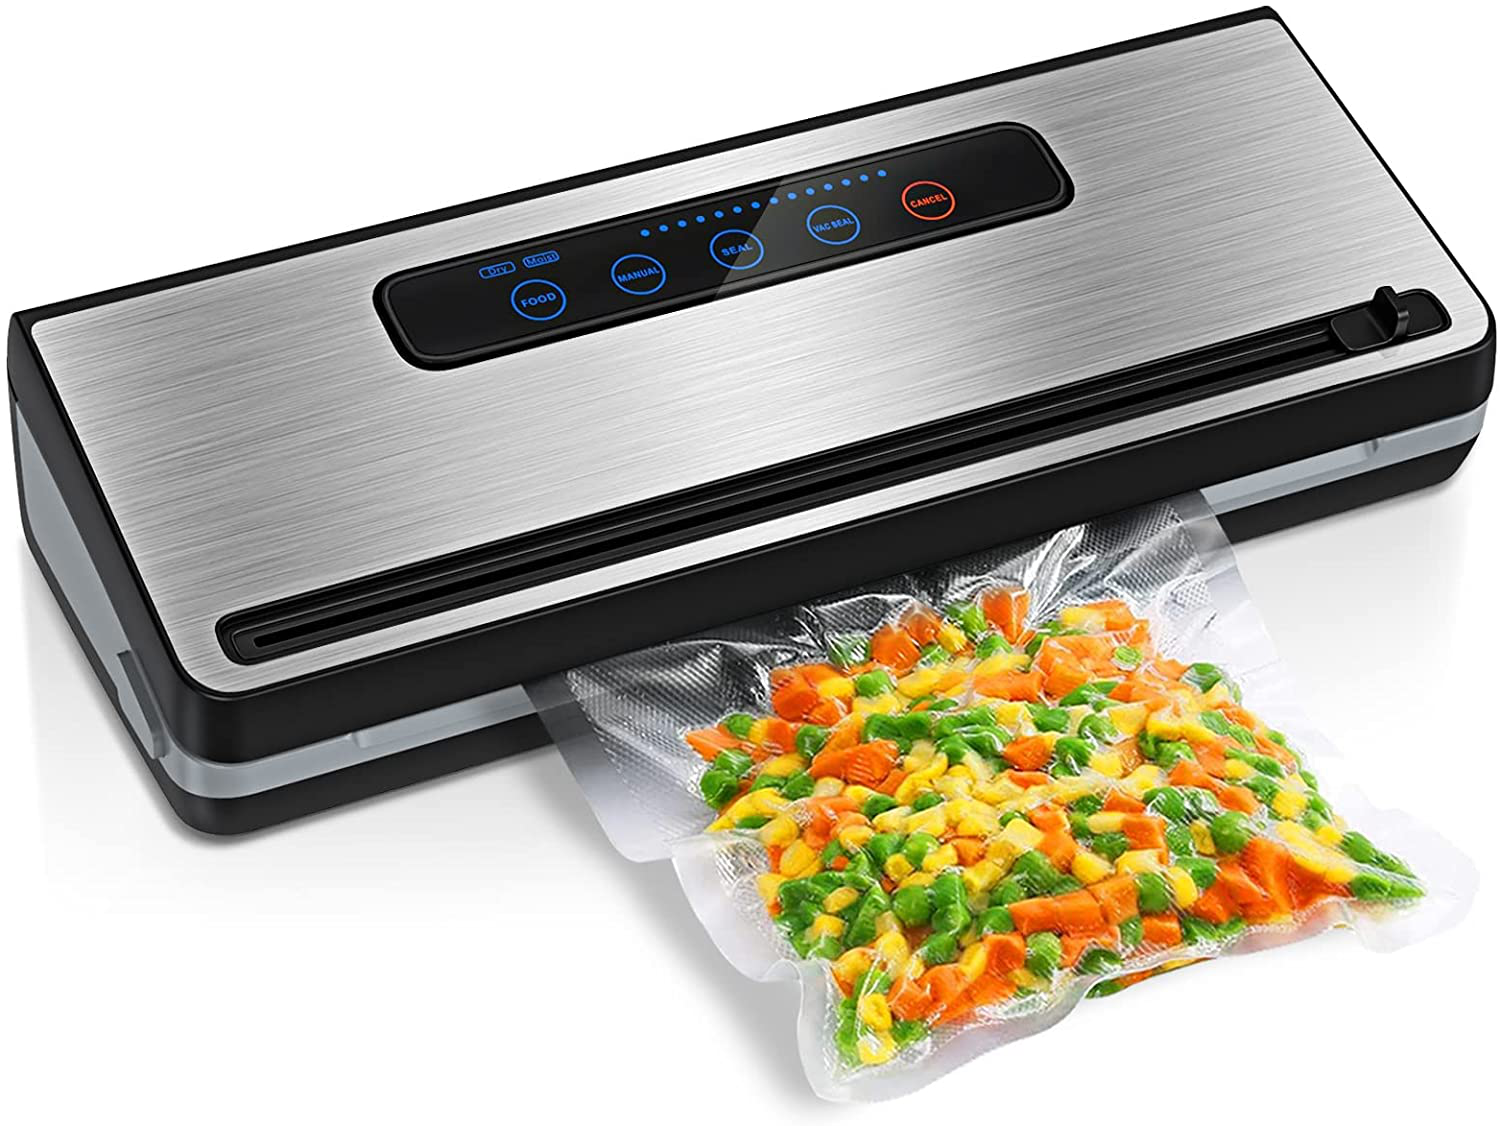 Food Saver Vacuum Sealer Machine with Built-In Cutter & 11 Inch Sealing Roll Bag